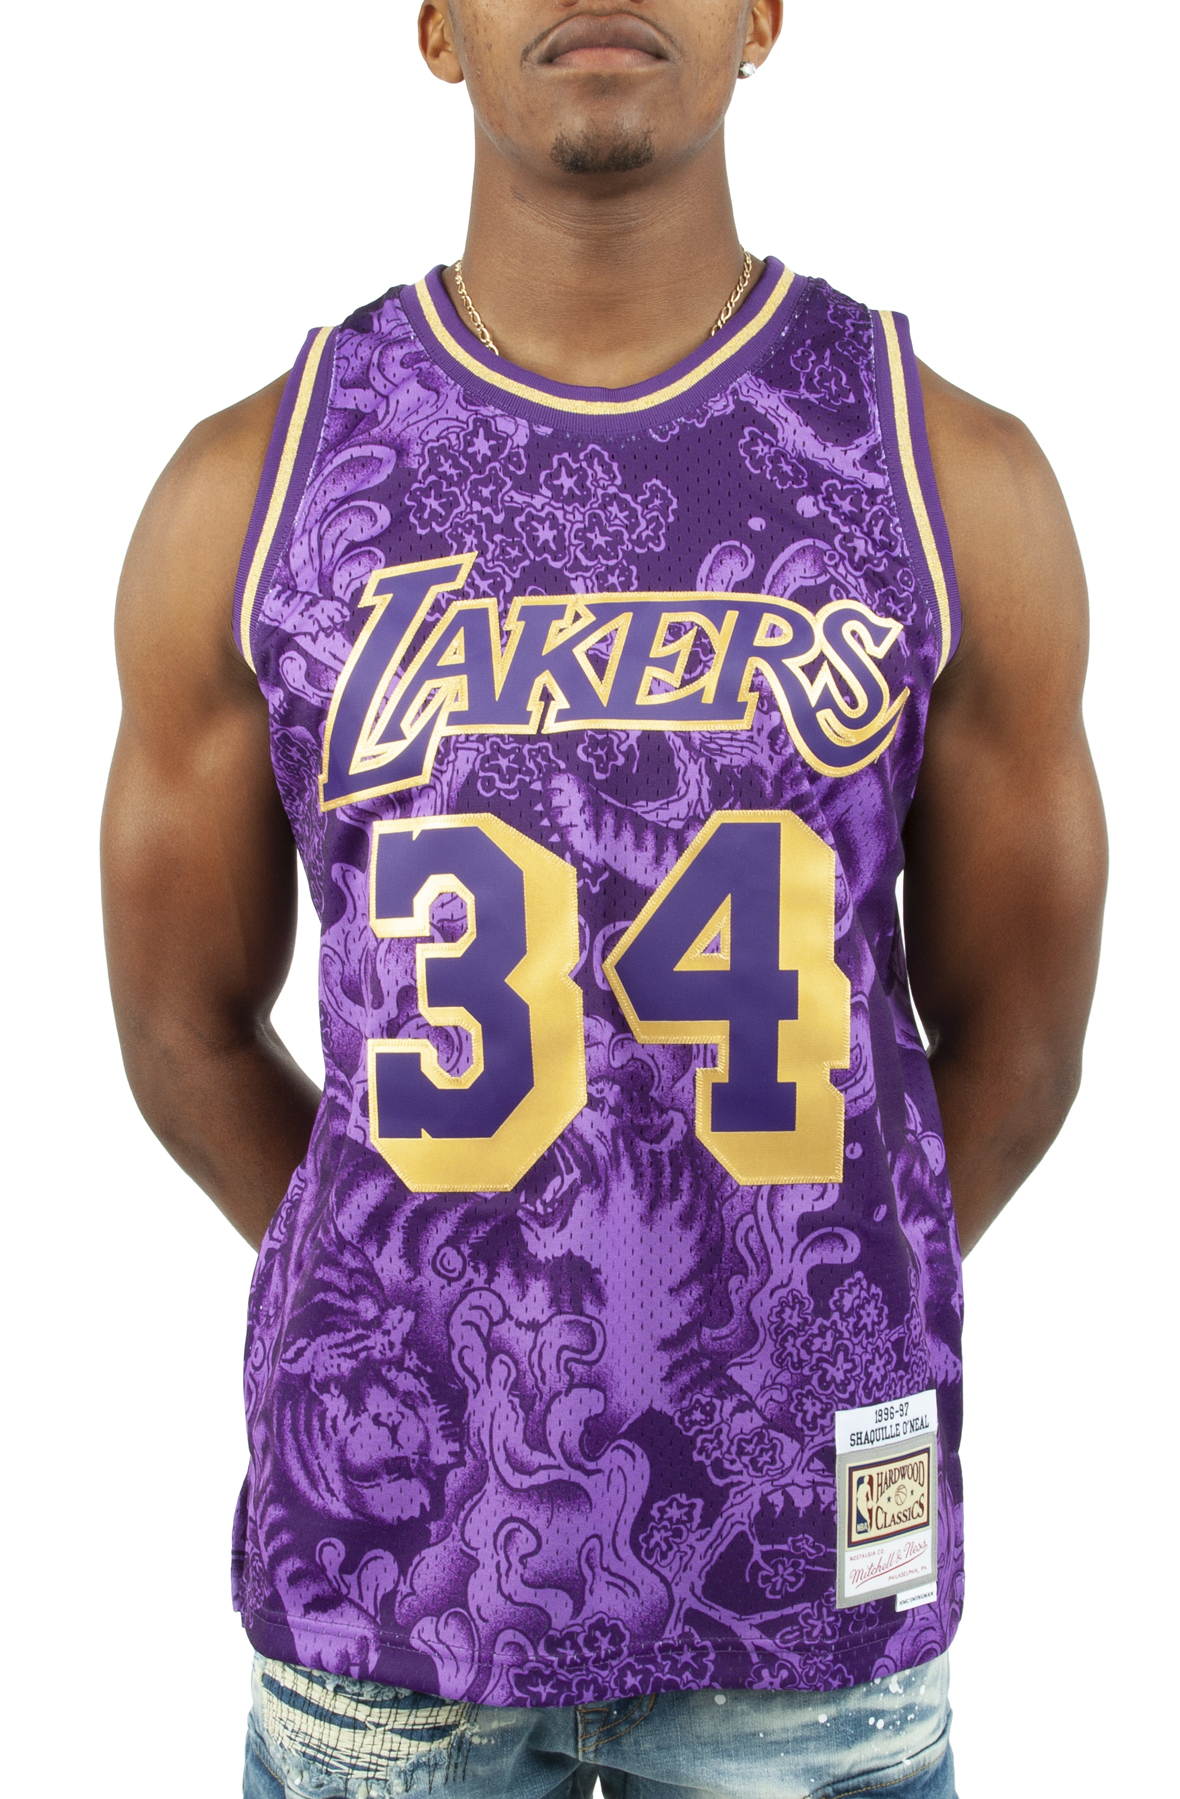 Shaquille O'Neal Los Angeles Lakers Mitchell & Ness 1996/97